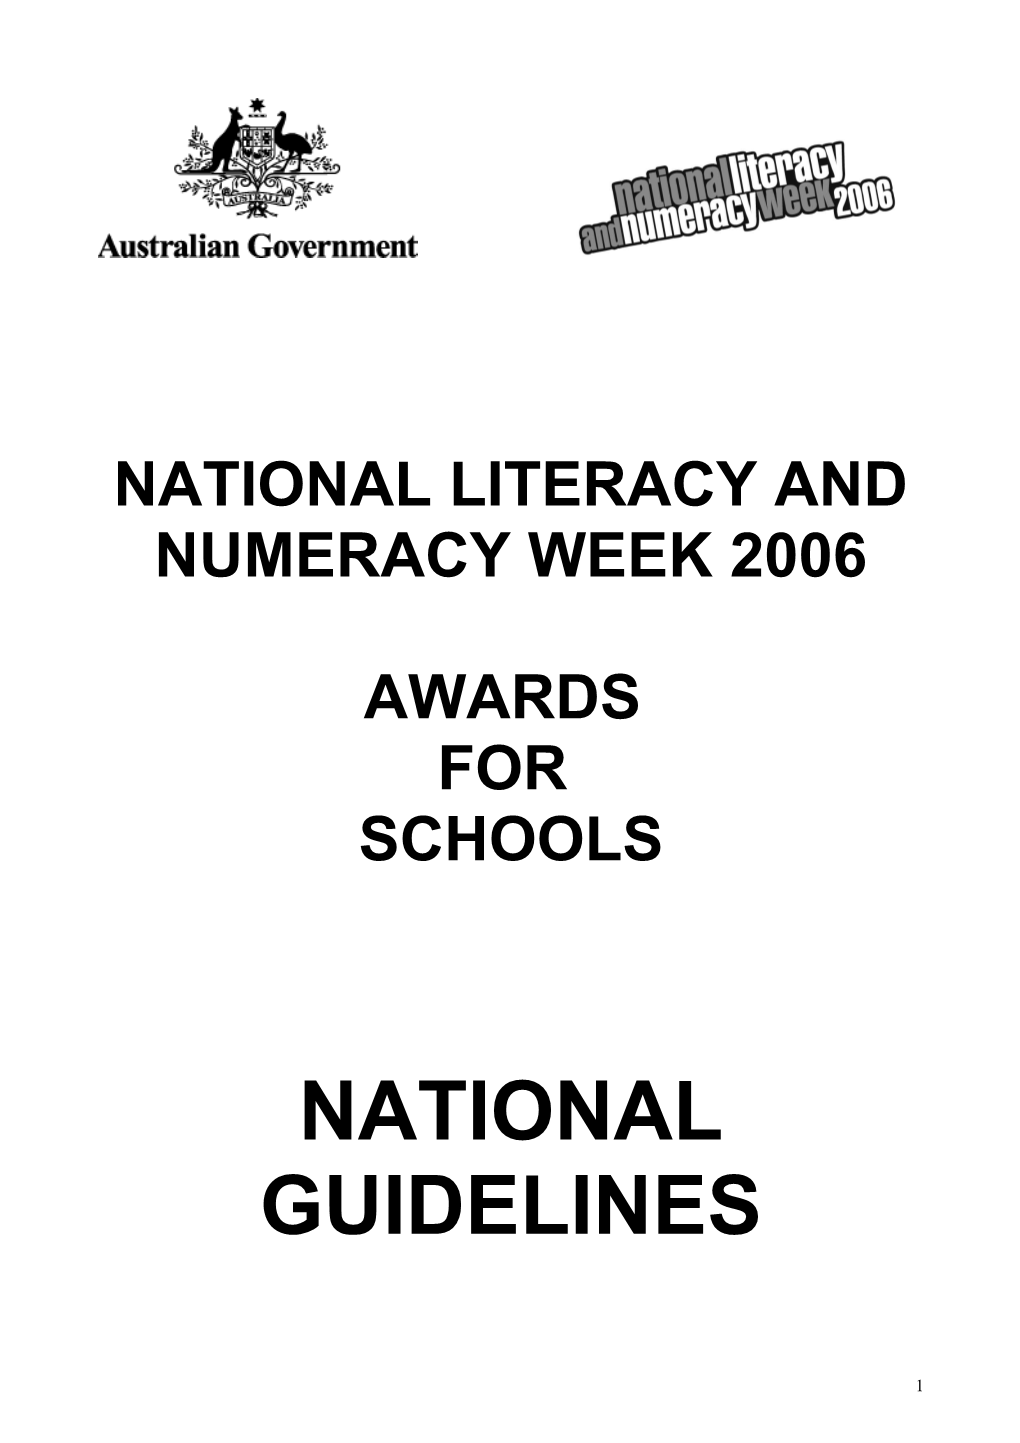 National Literacy and Numeracy Week 2005 - Awards for Schools - Guidelines